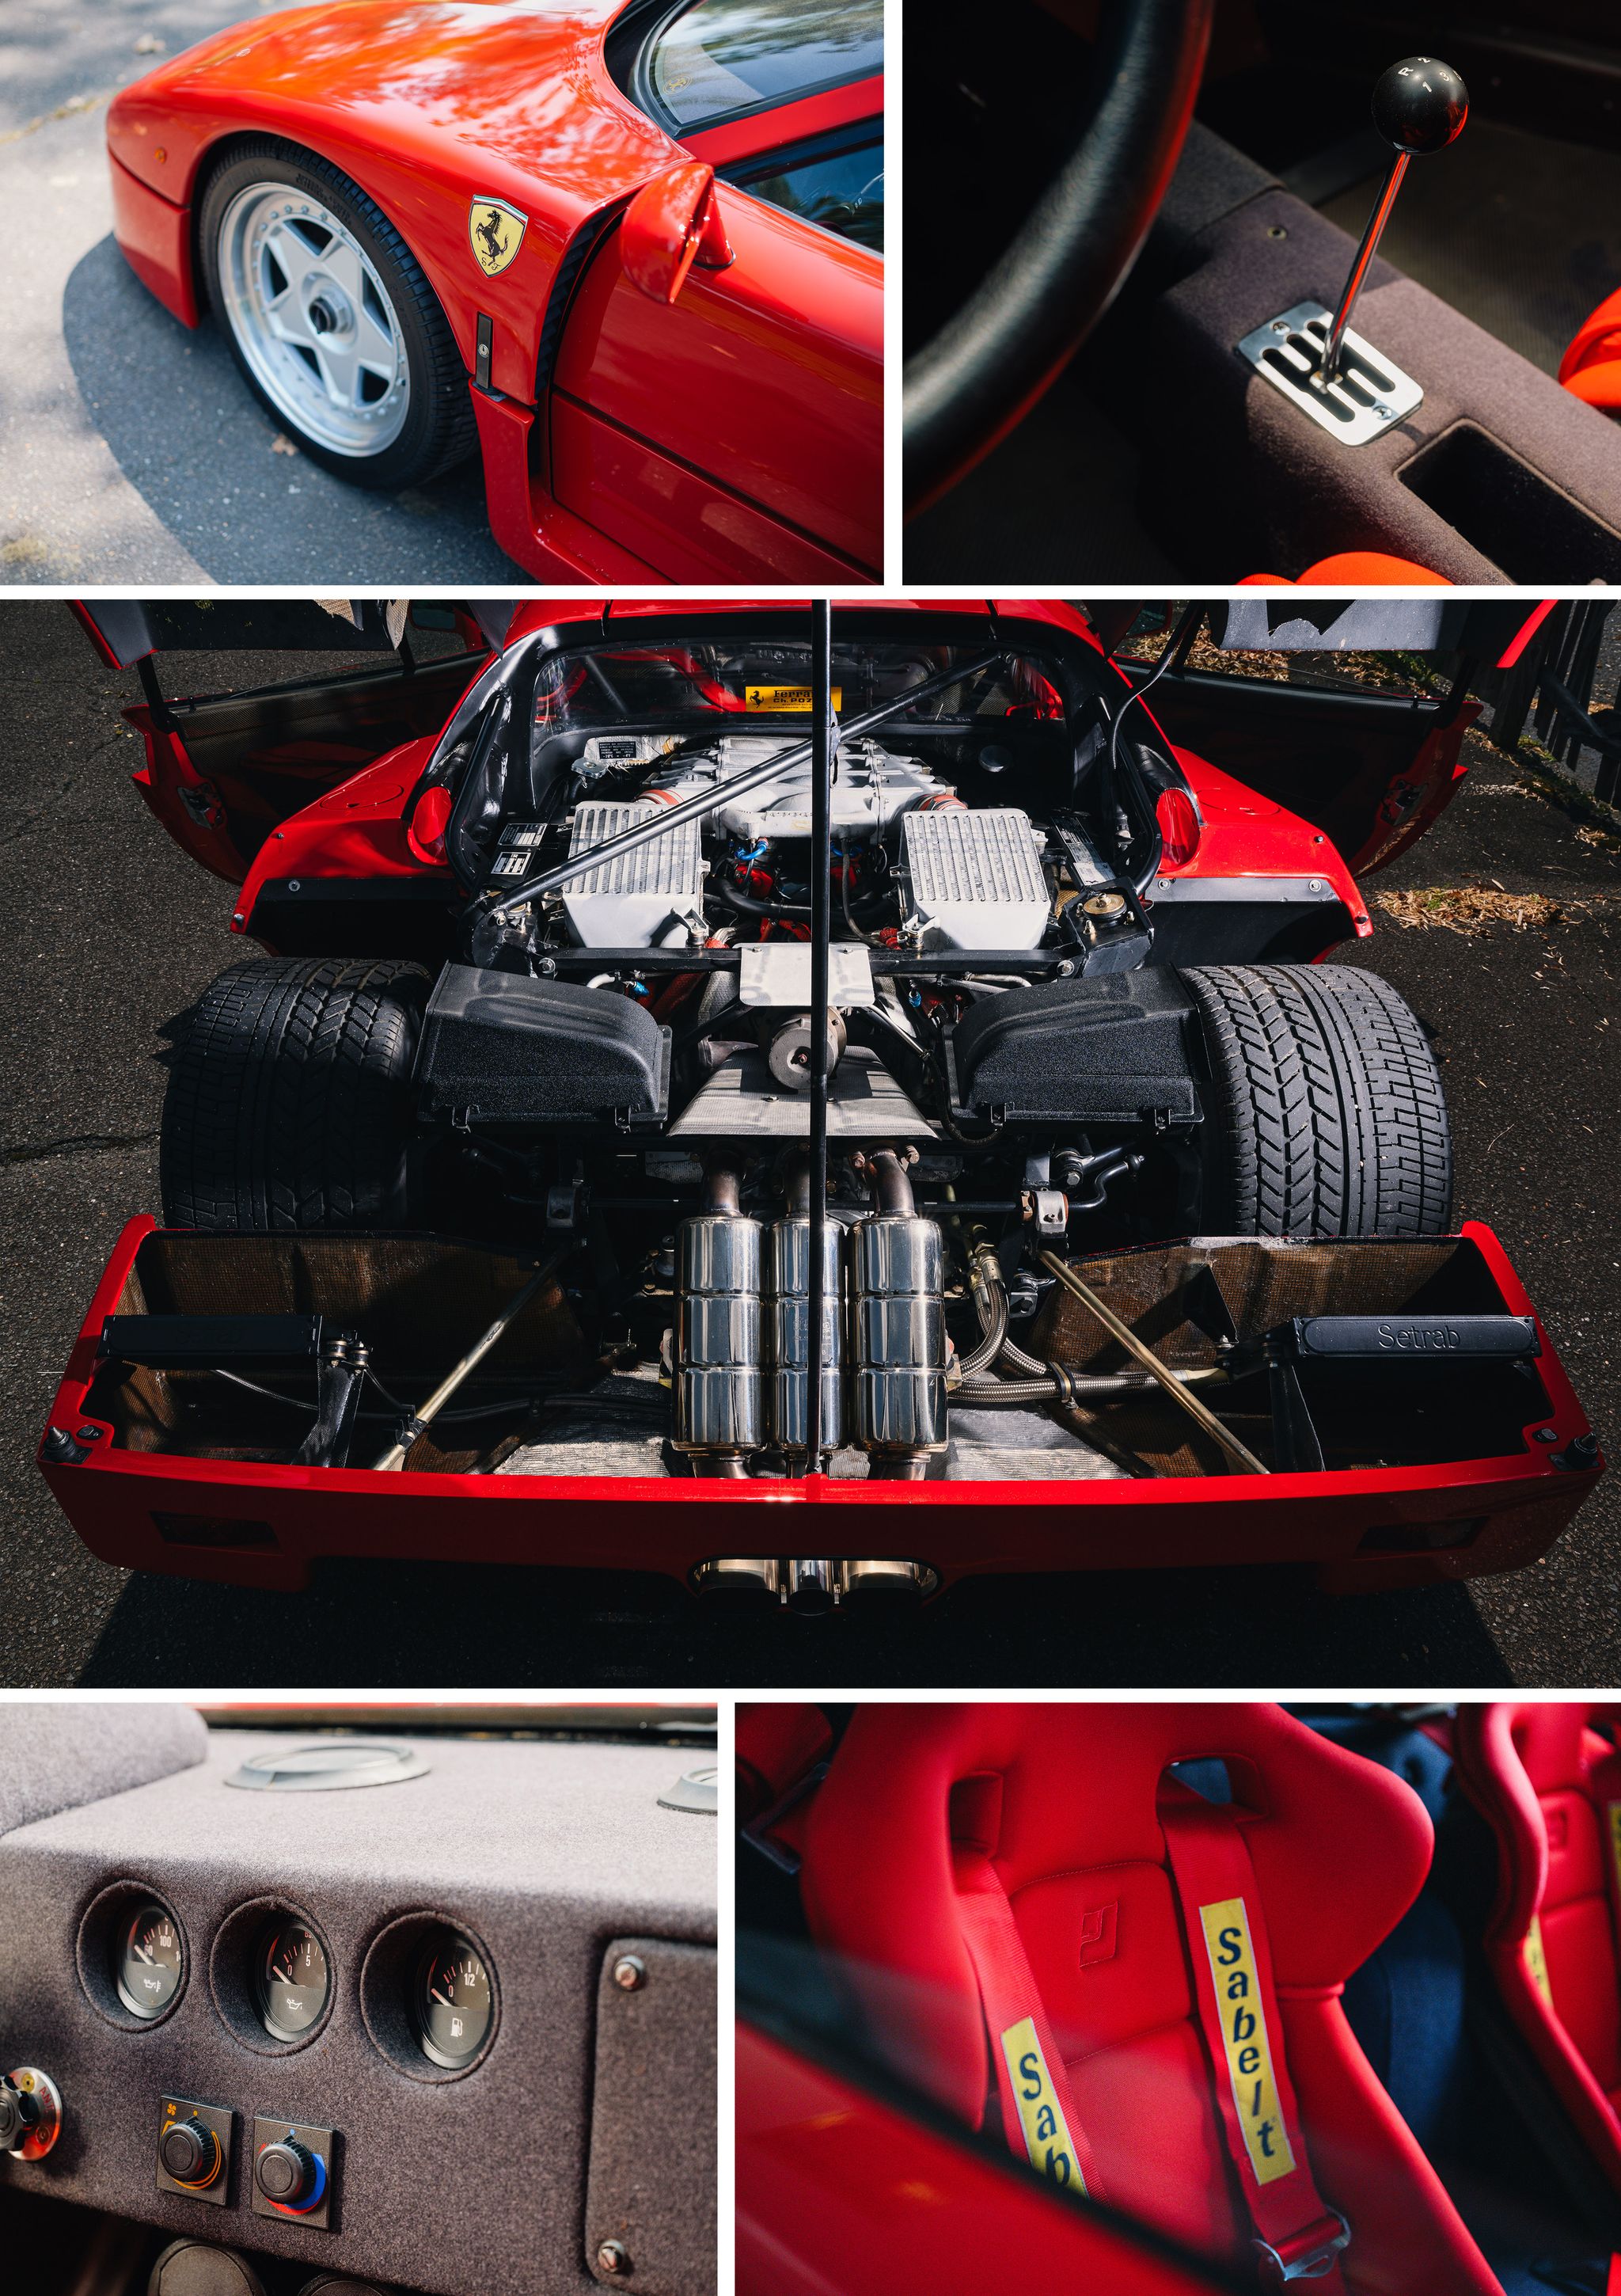 Tested: 1991 Ferrari F40 Feasts on the Timid